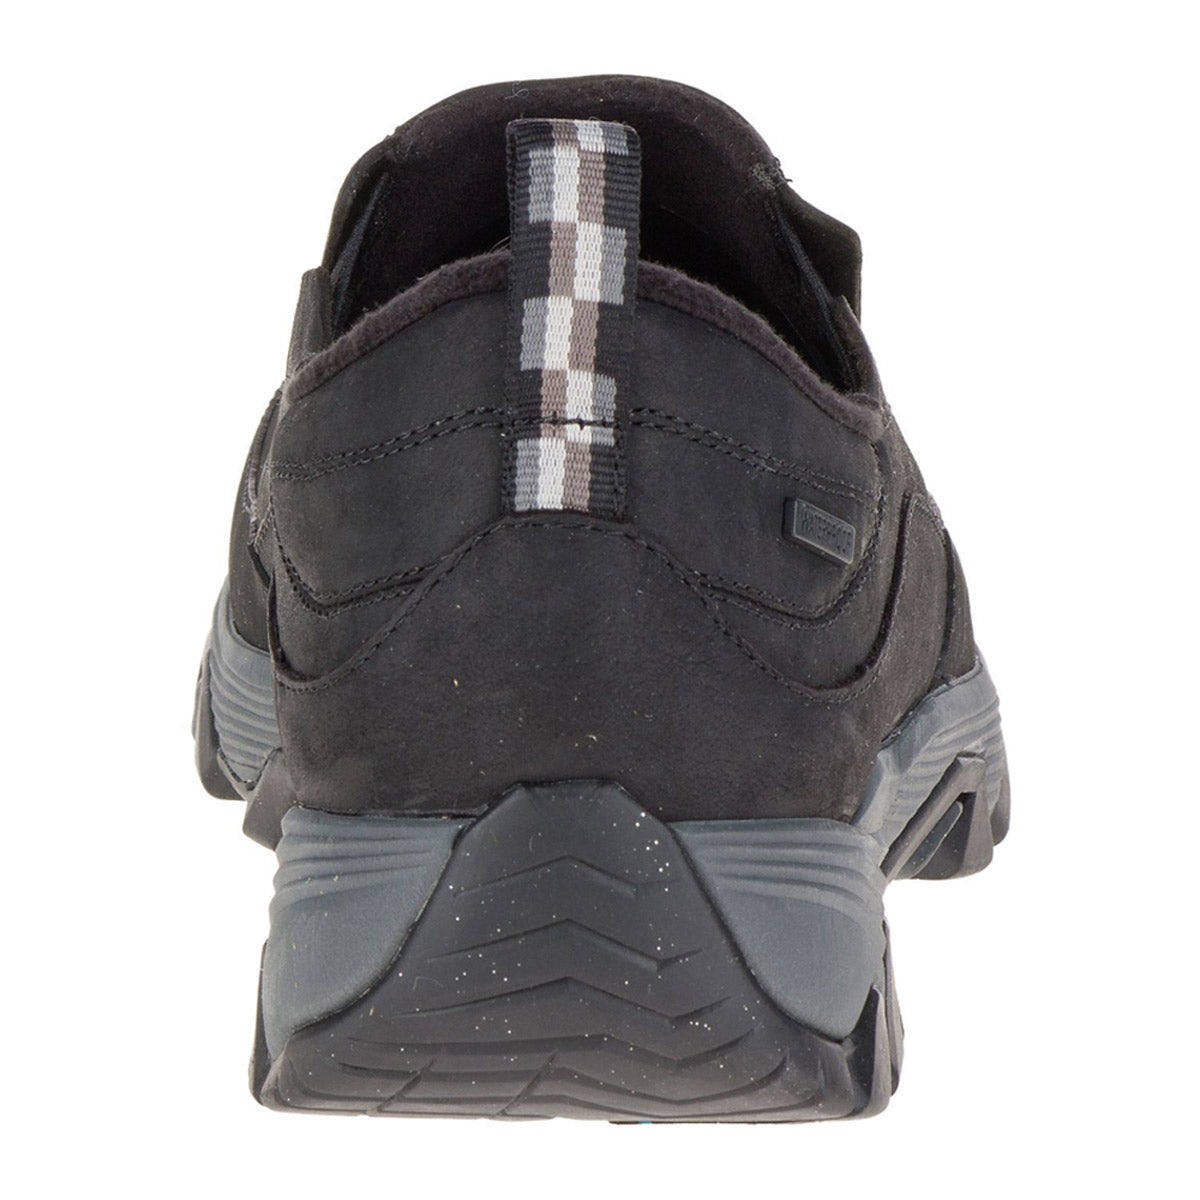 A rear view of a Merrell black athletic shoe with a reflective stripe on the heel and a Vibram® Arctic Grip™ outsole.